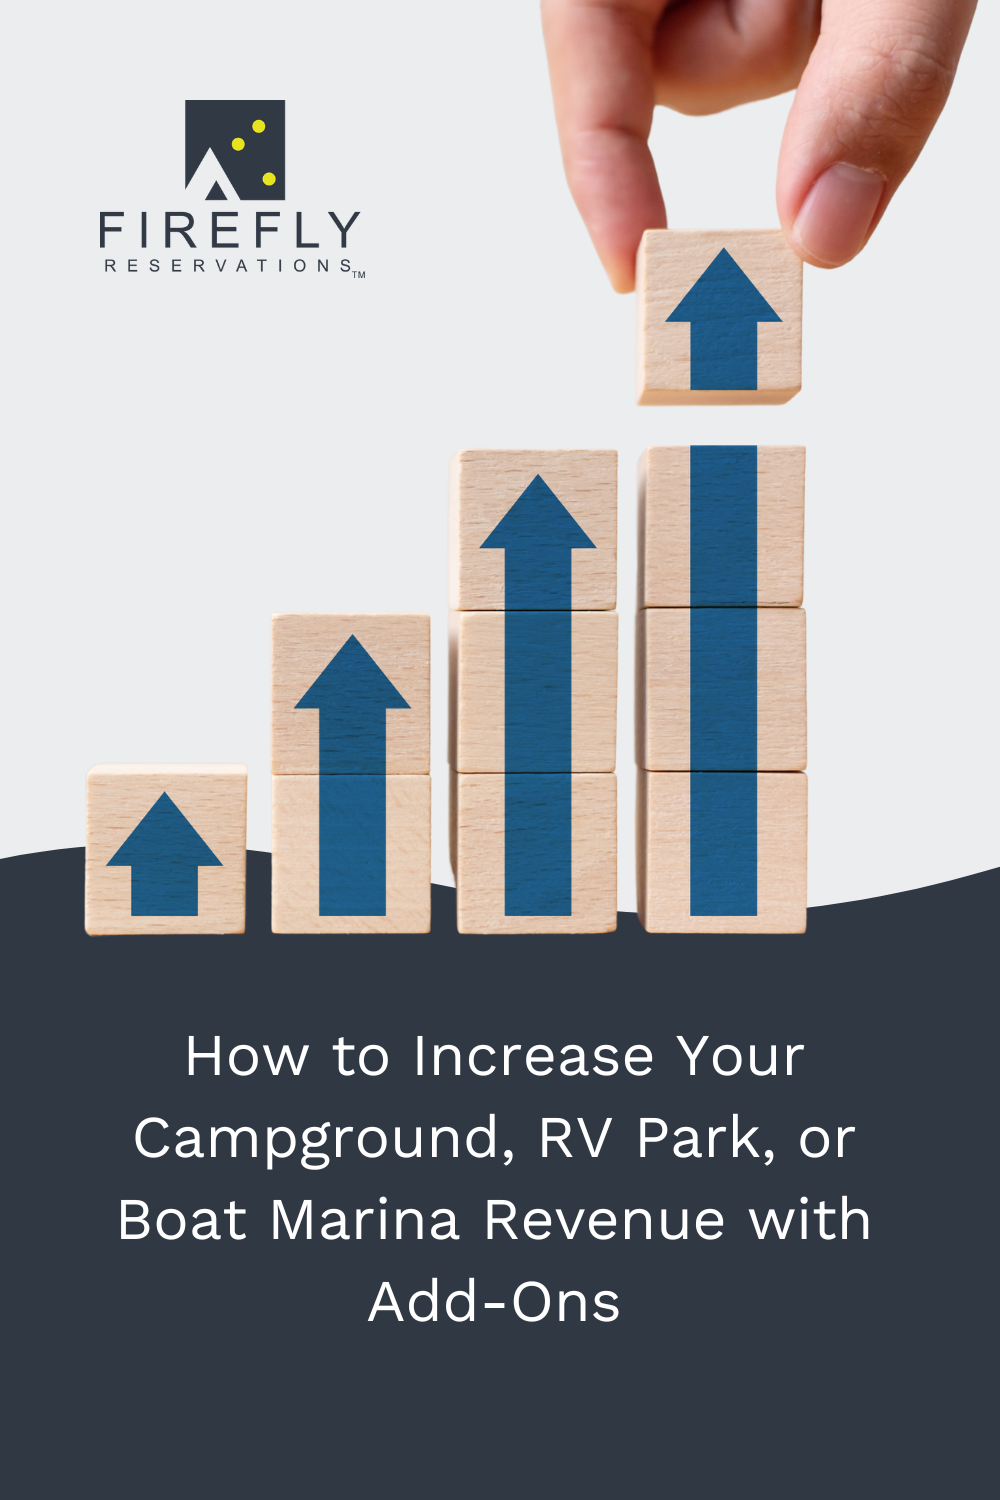 How to Increase Your Campground, RV Park, or Boat Marina Revenue with Add-Ons